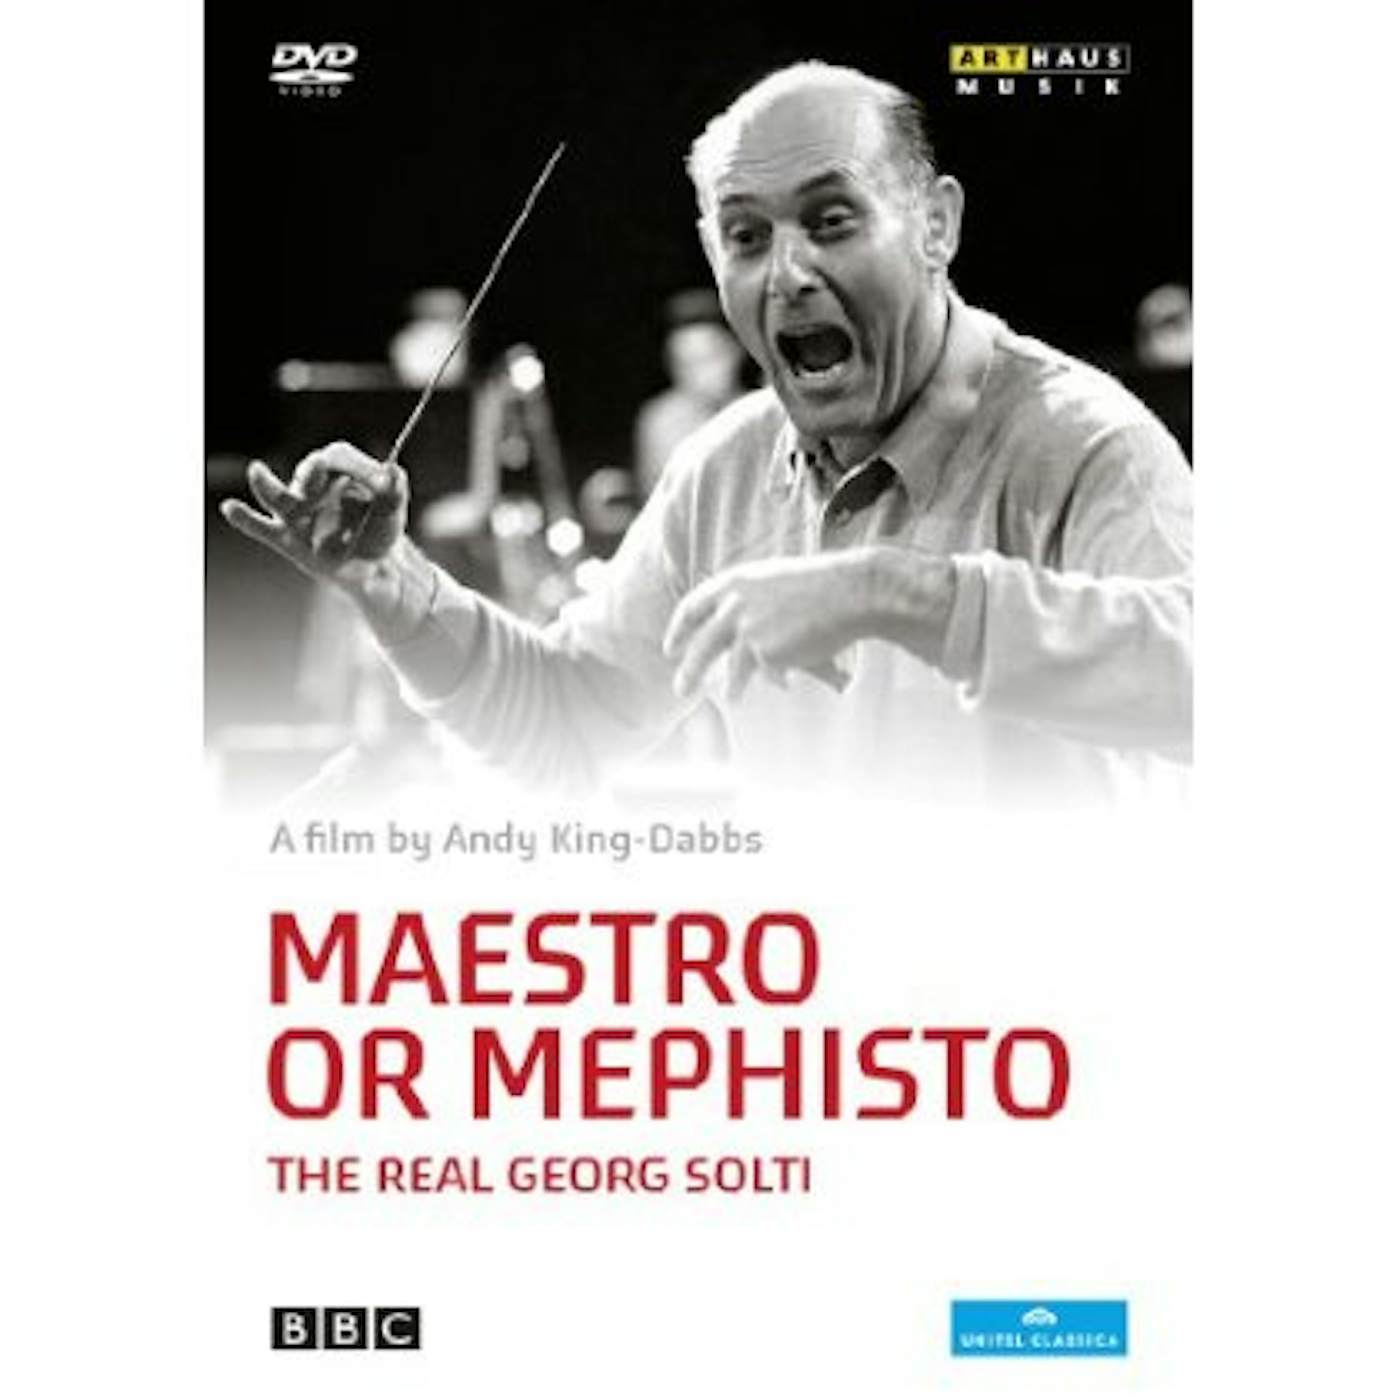 MAESTRO OR MEPHISTO: REAL GEORG SOLTI DVD